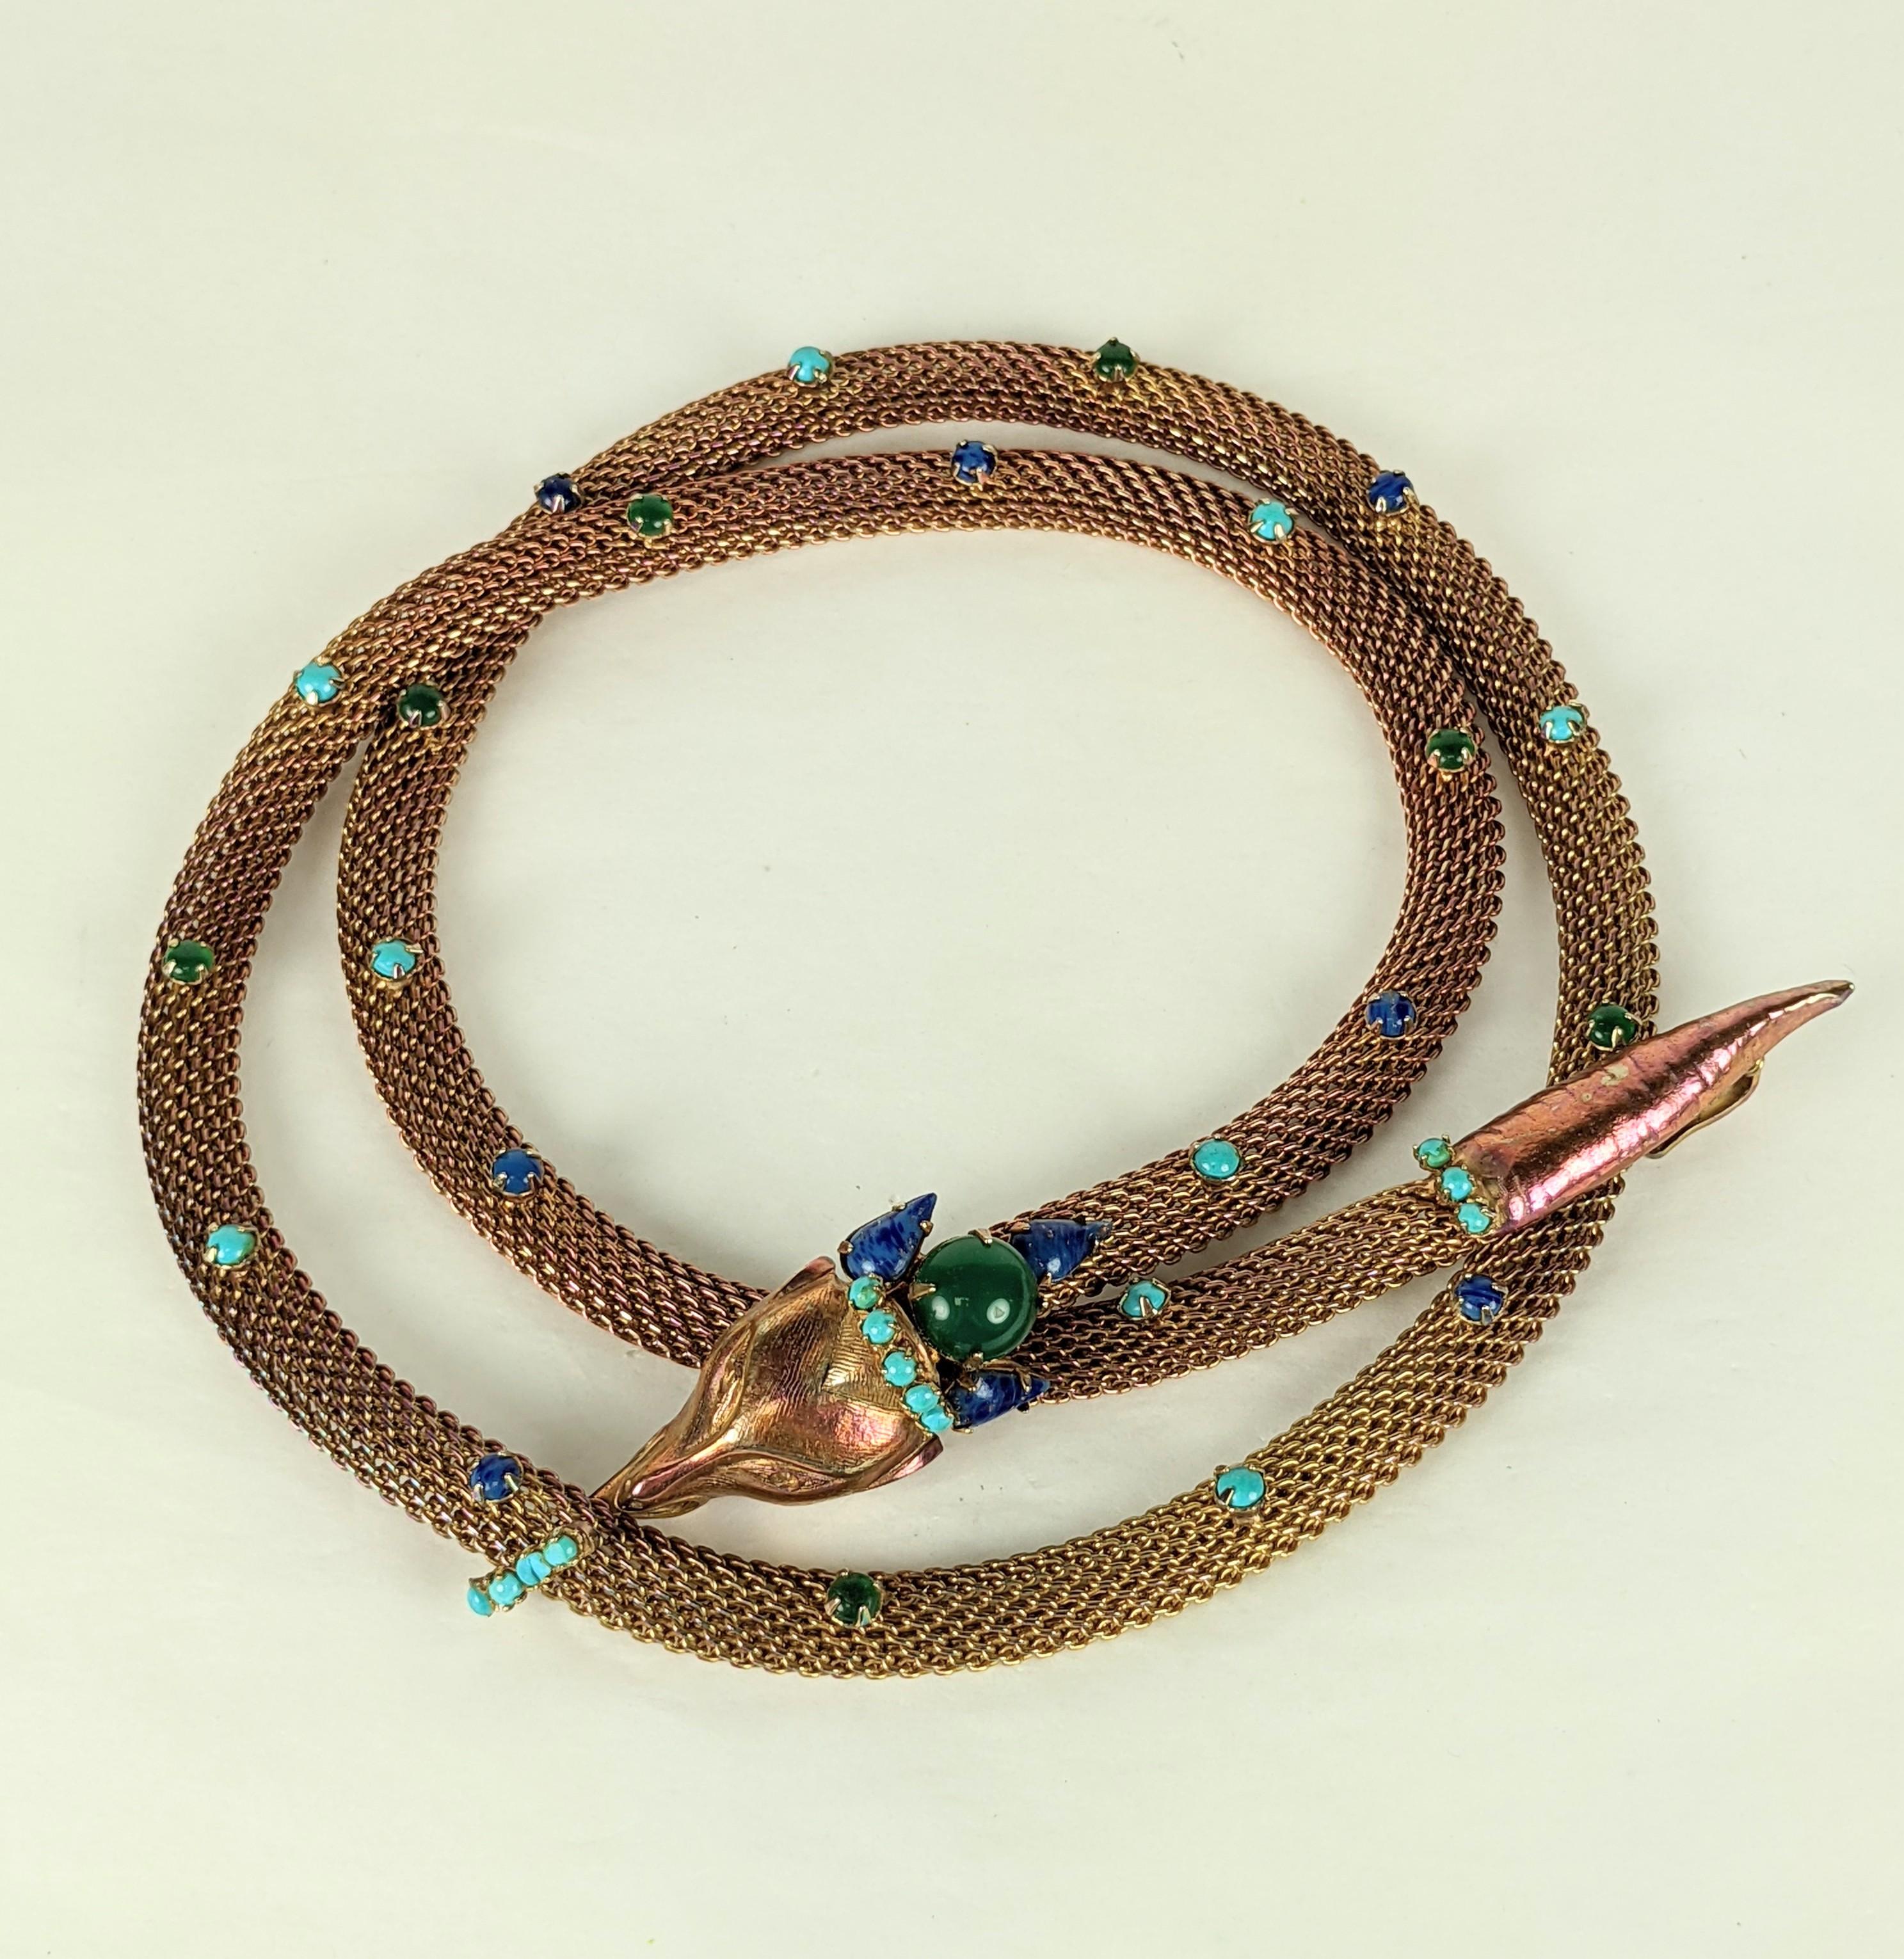 Unusual Robert Jeweled Fox Head Belt/ Necklace from the 1960's. Gilt tubular mesh is accented with glass stones and genuine turquoise cabochons. The jeweled fox head features a hook which allows use as a necklace or belt. Very Indian in inspiration